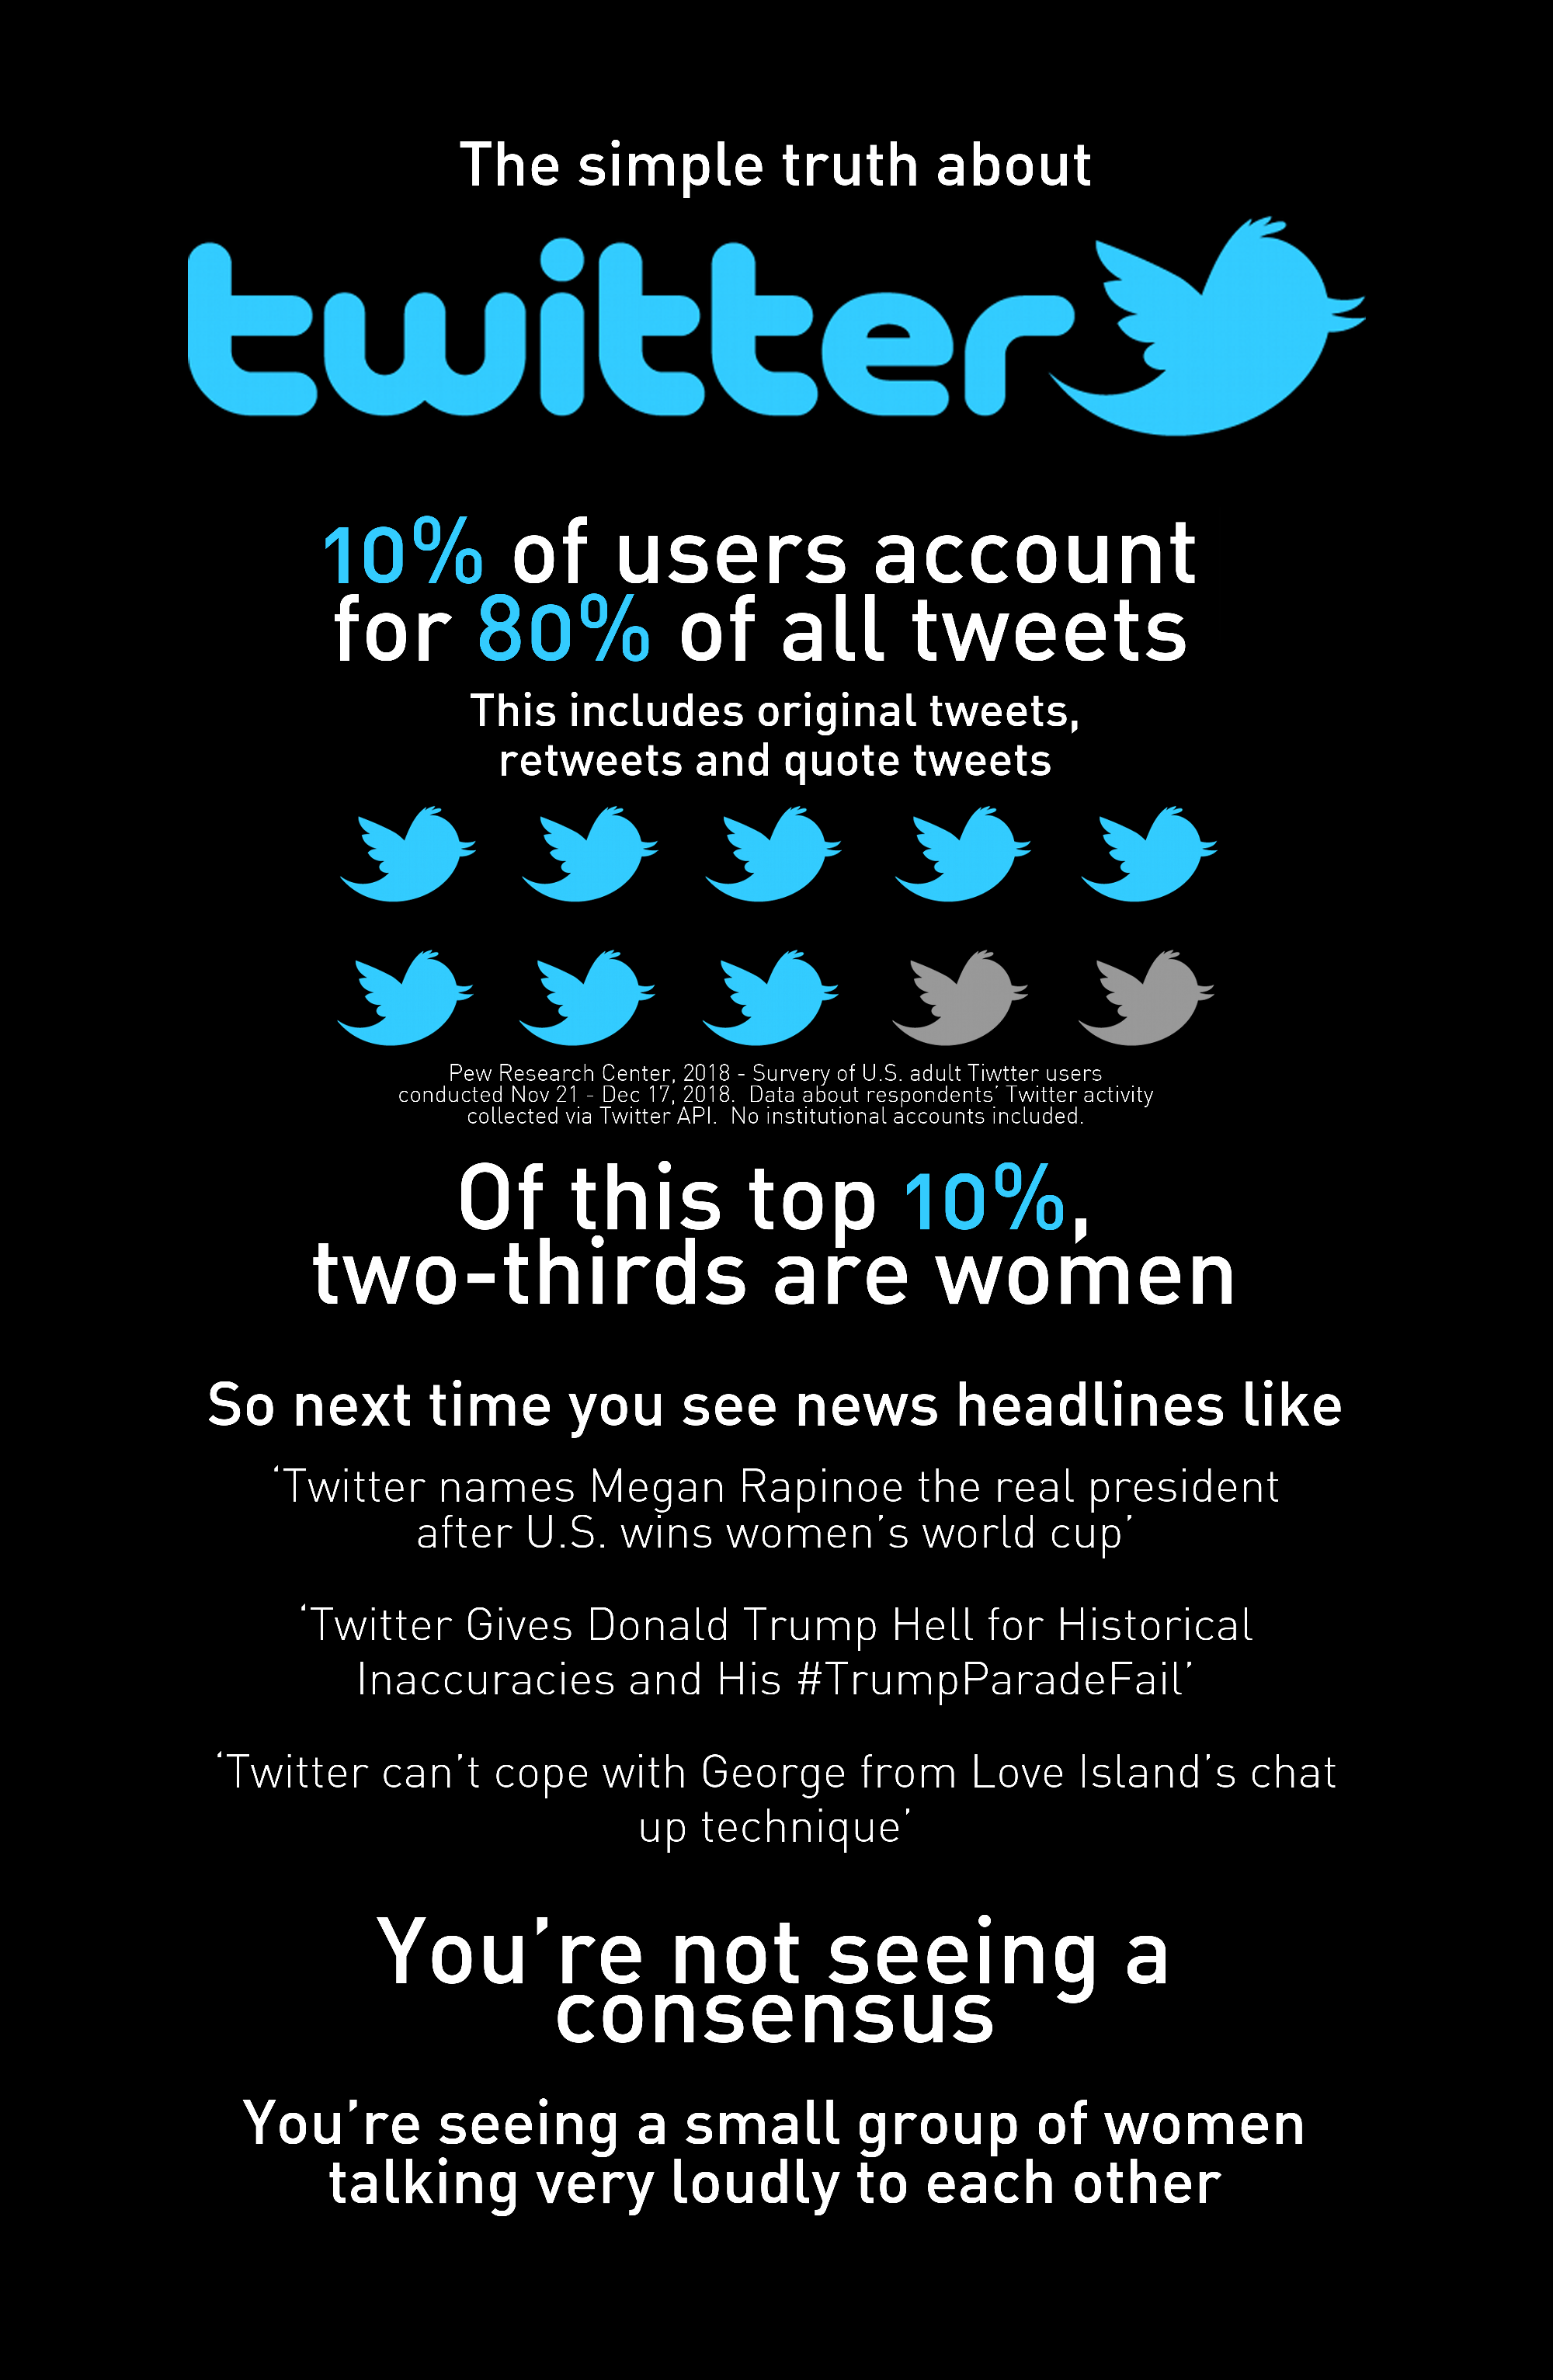 twitter facts they are not representative of the population image